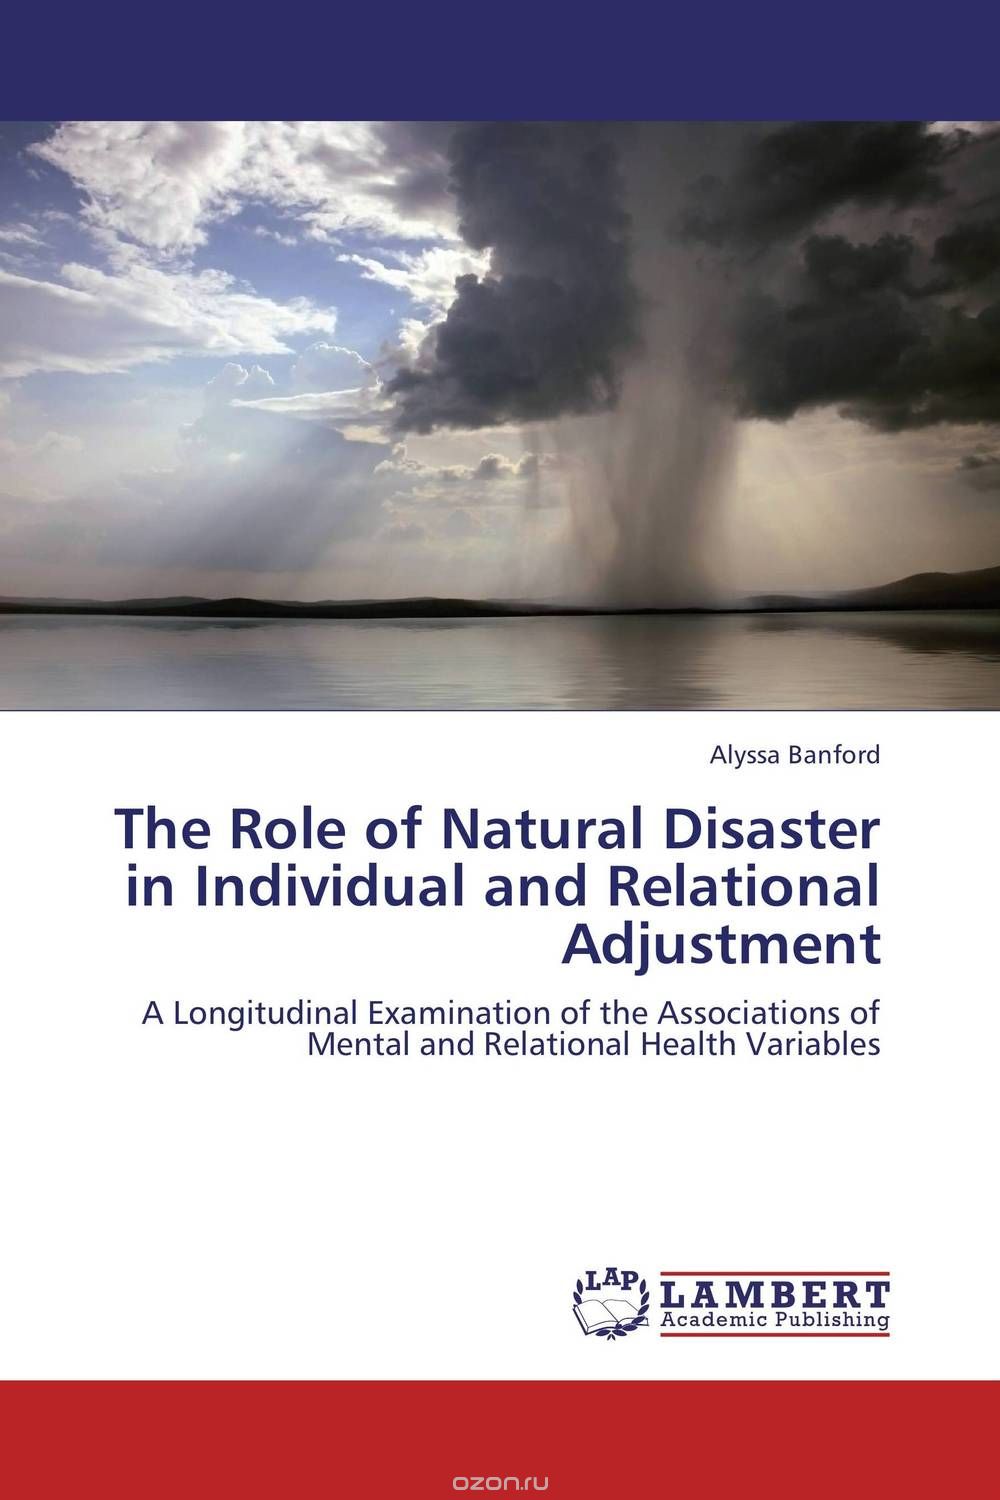 The Role of Natural Disaster in Individual and Relational Adjustment